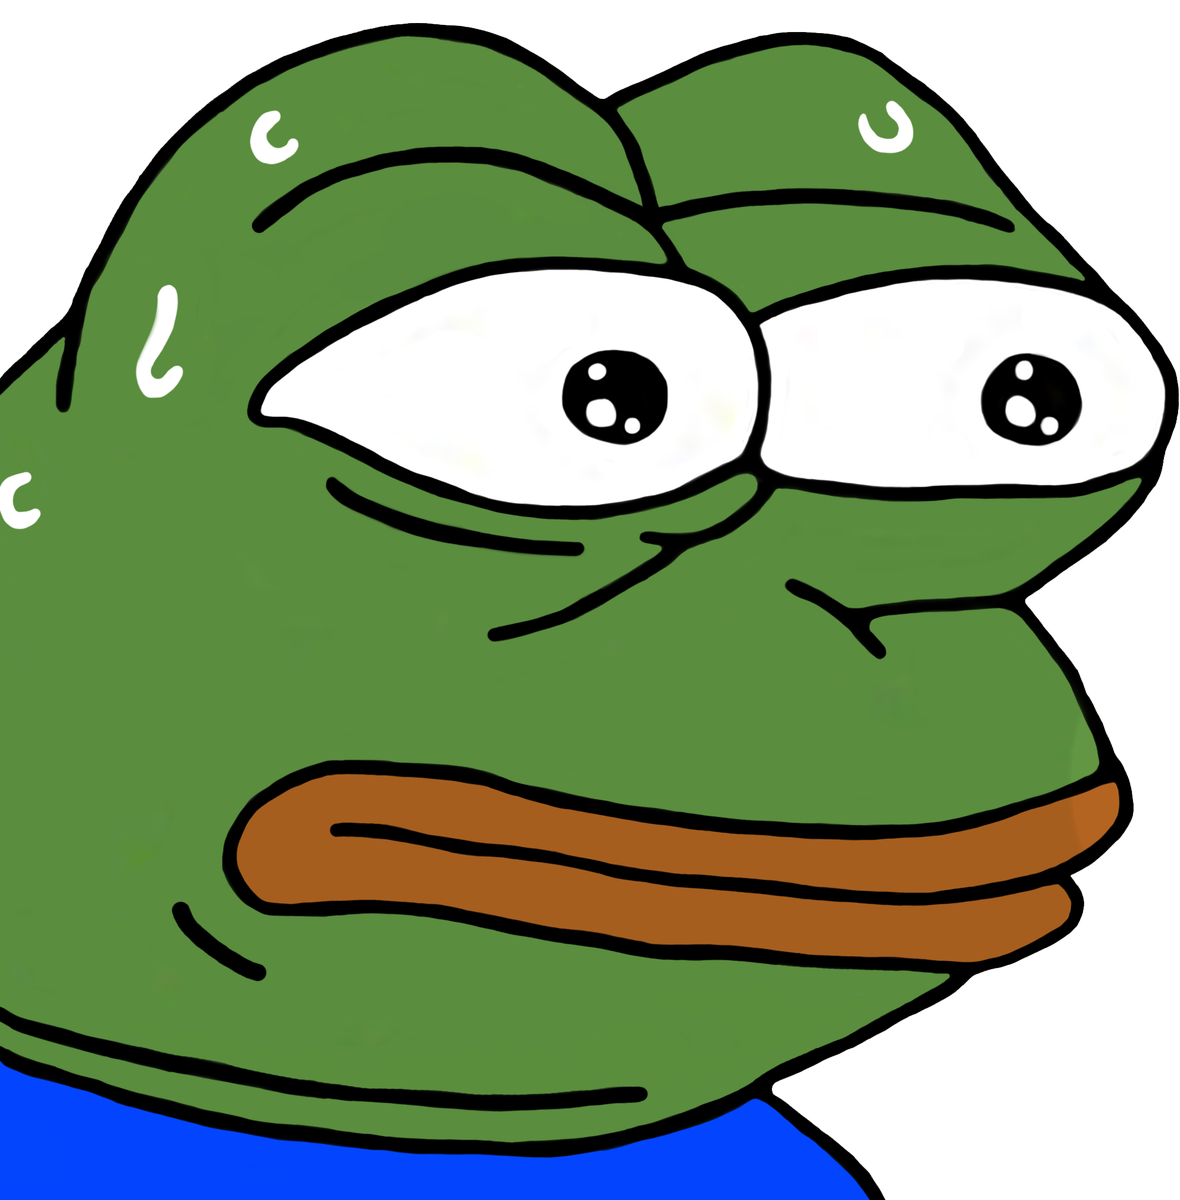 Download On Youtube Pepe  Emote  Frog T Shirt The HQ PNG  